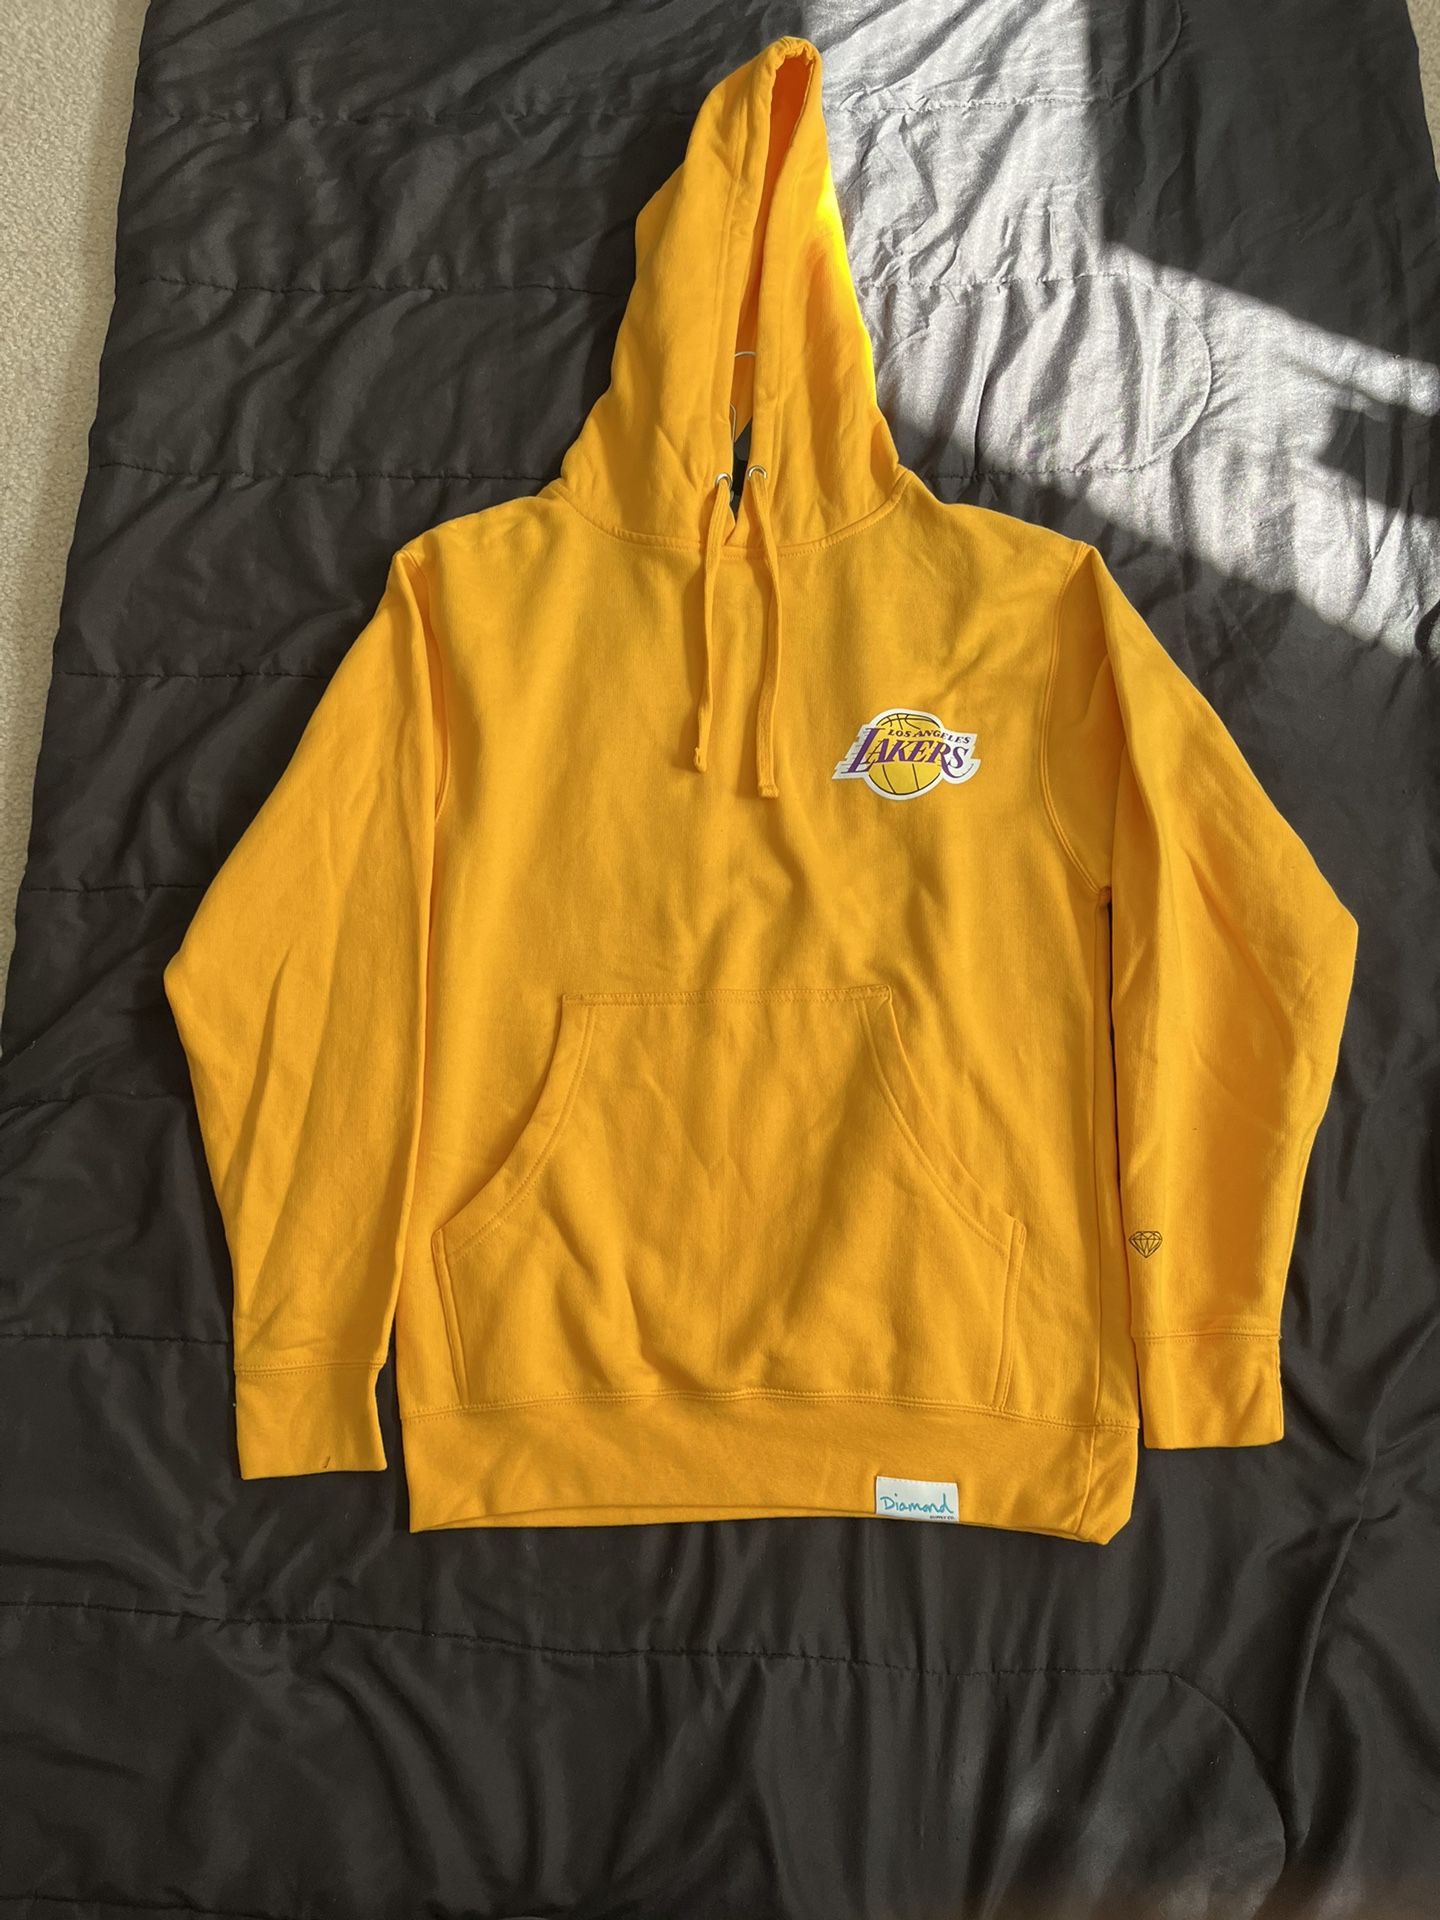 Diamond Supply x Los Angeles Lakers x Looney Tunes Yellow Hoodie Brand New Condition Sz Small